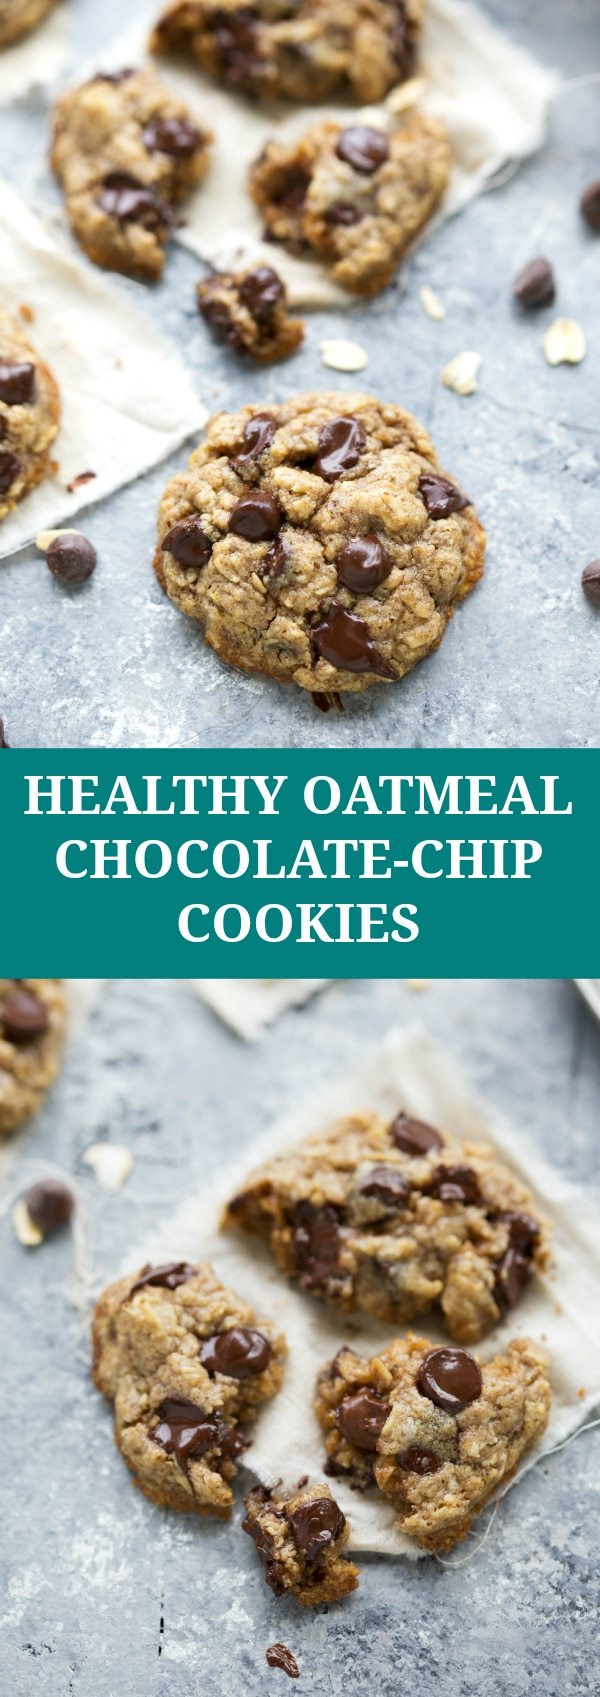 Cocoa Oatmeal Cookies Healthy
 The BEST healthy oatmeal chocolate chip cookies Chelsea